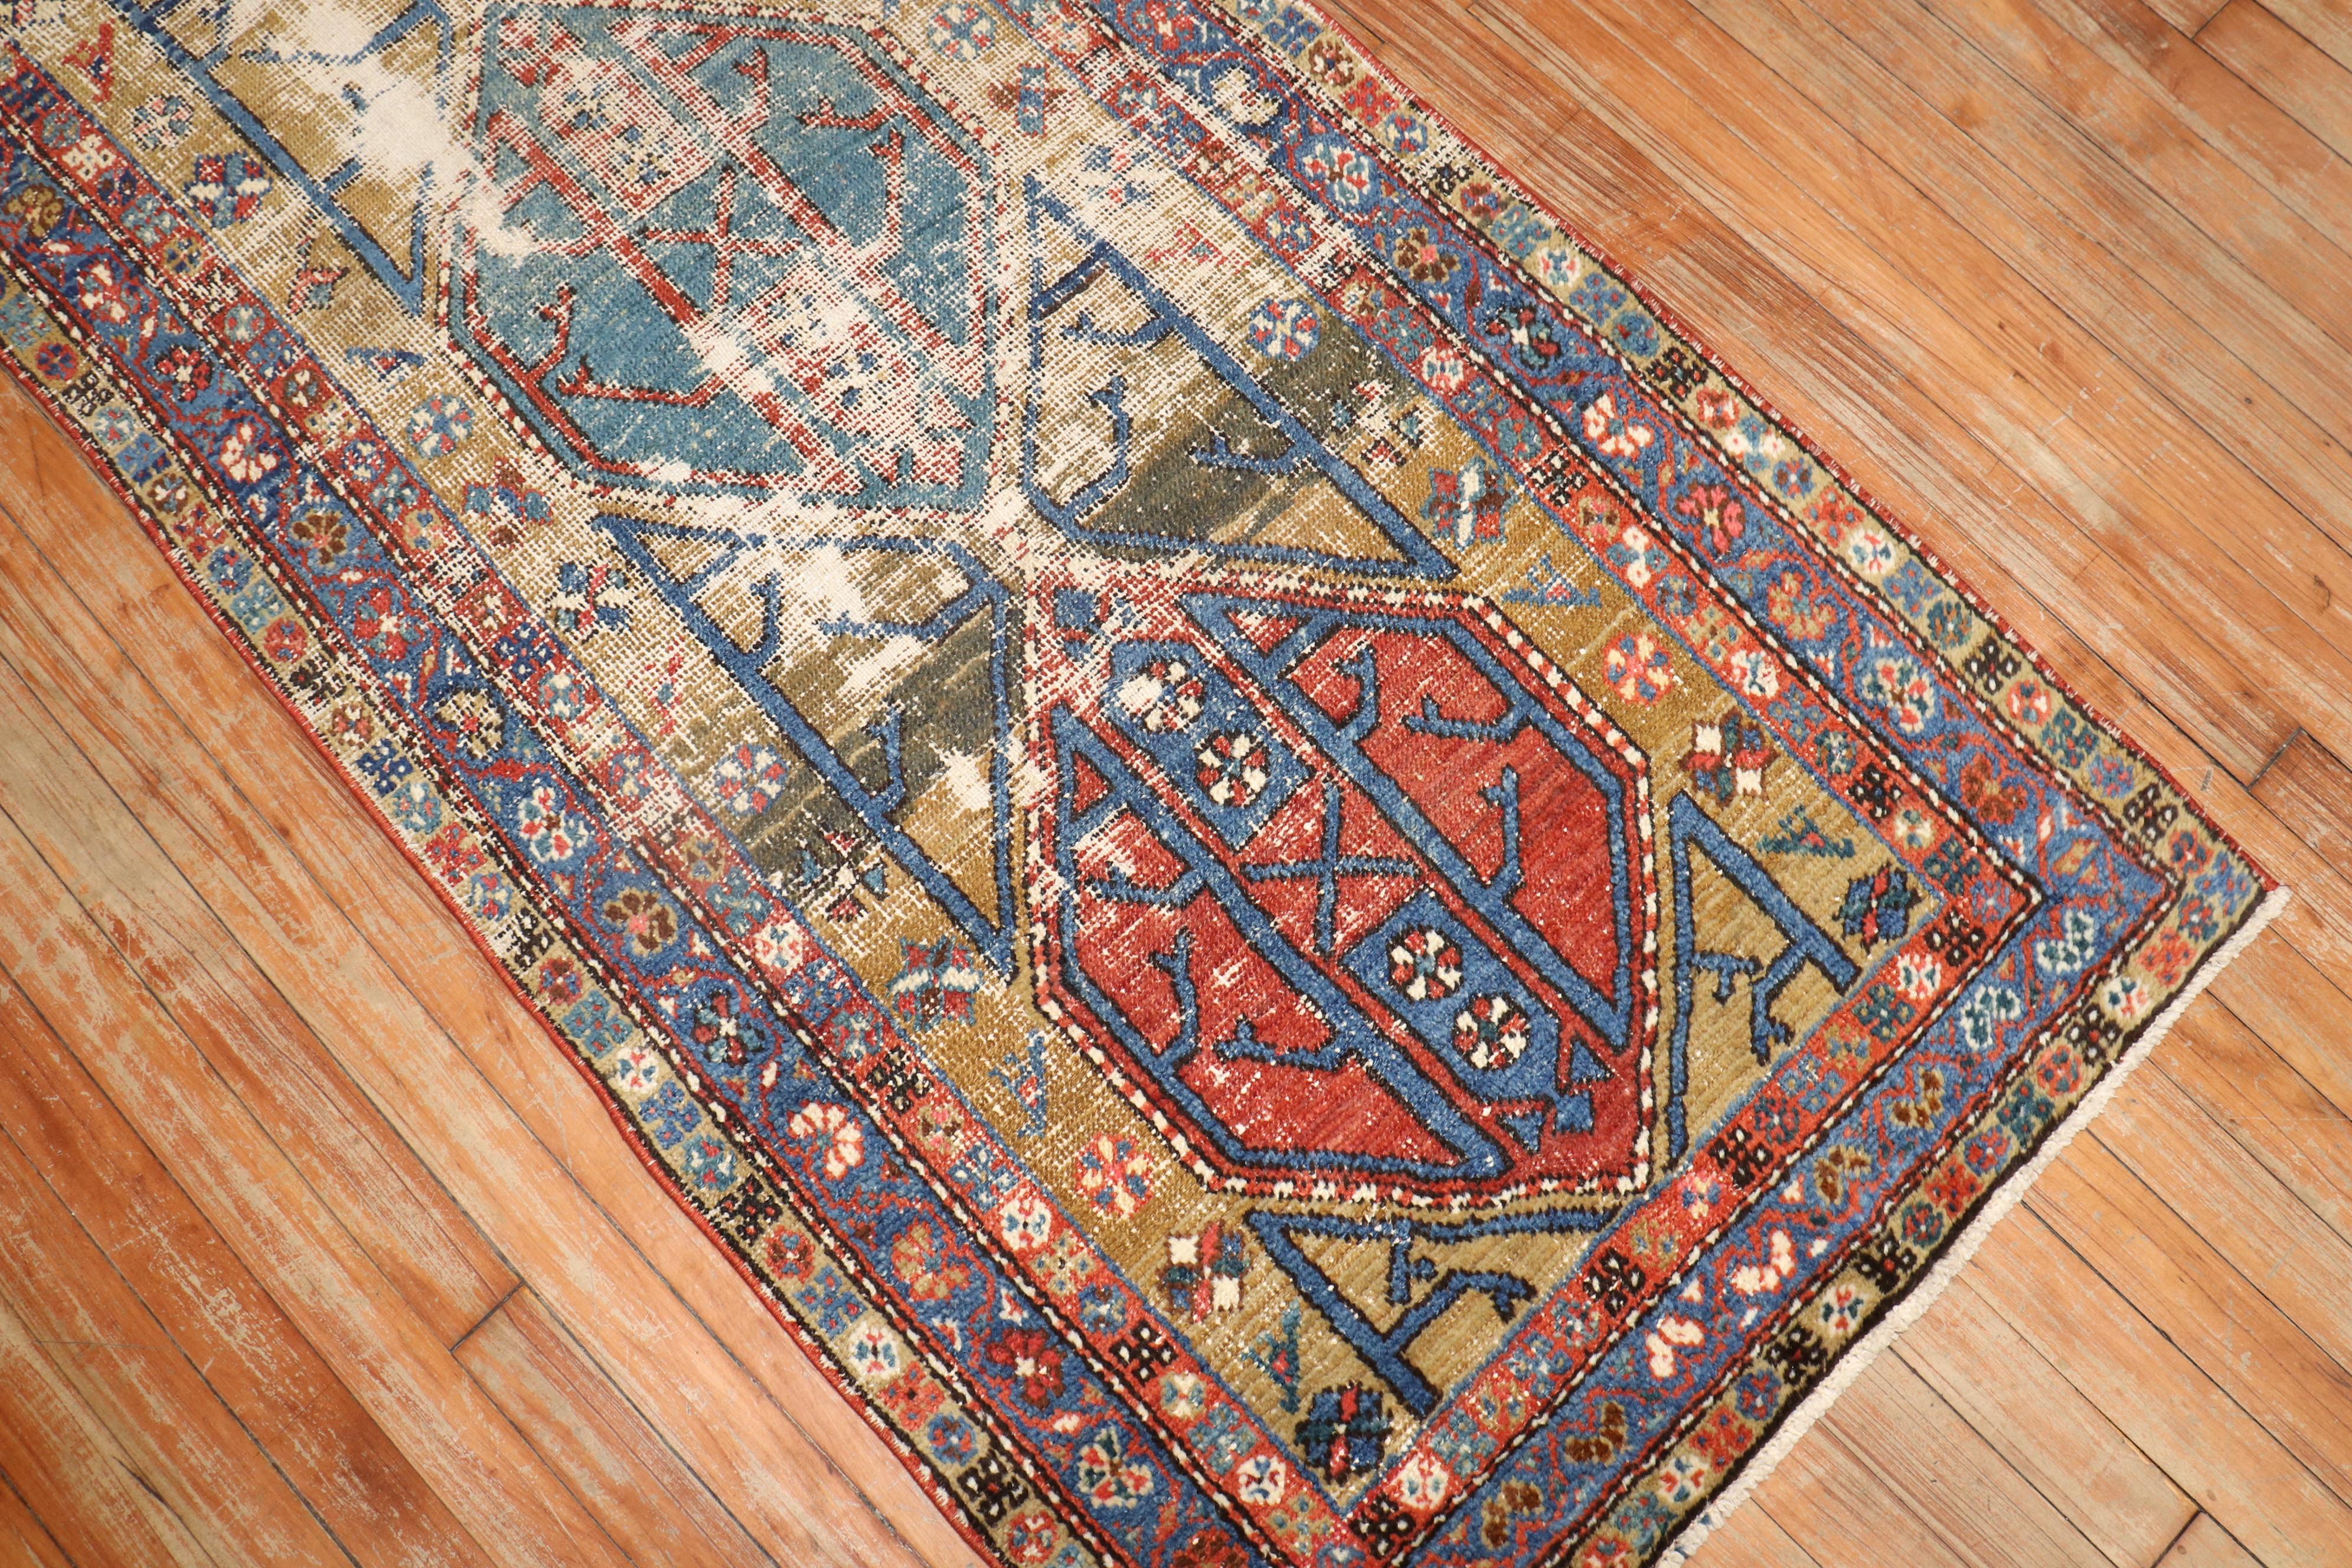 an early 20th -century Worn Persian Runner

Measure: 2'9'' x 10'7''.